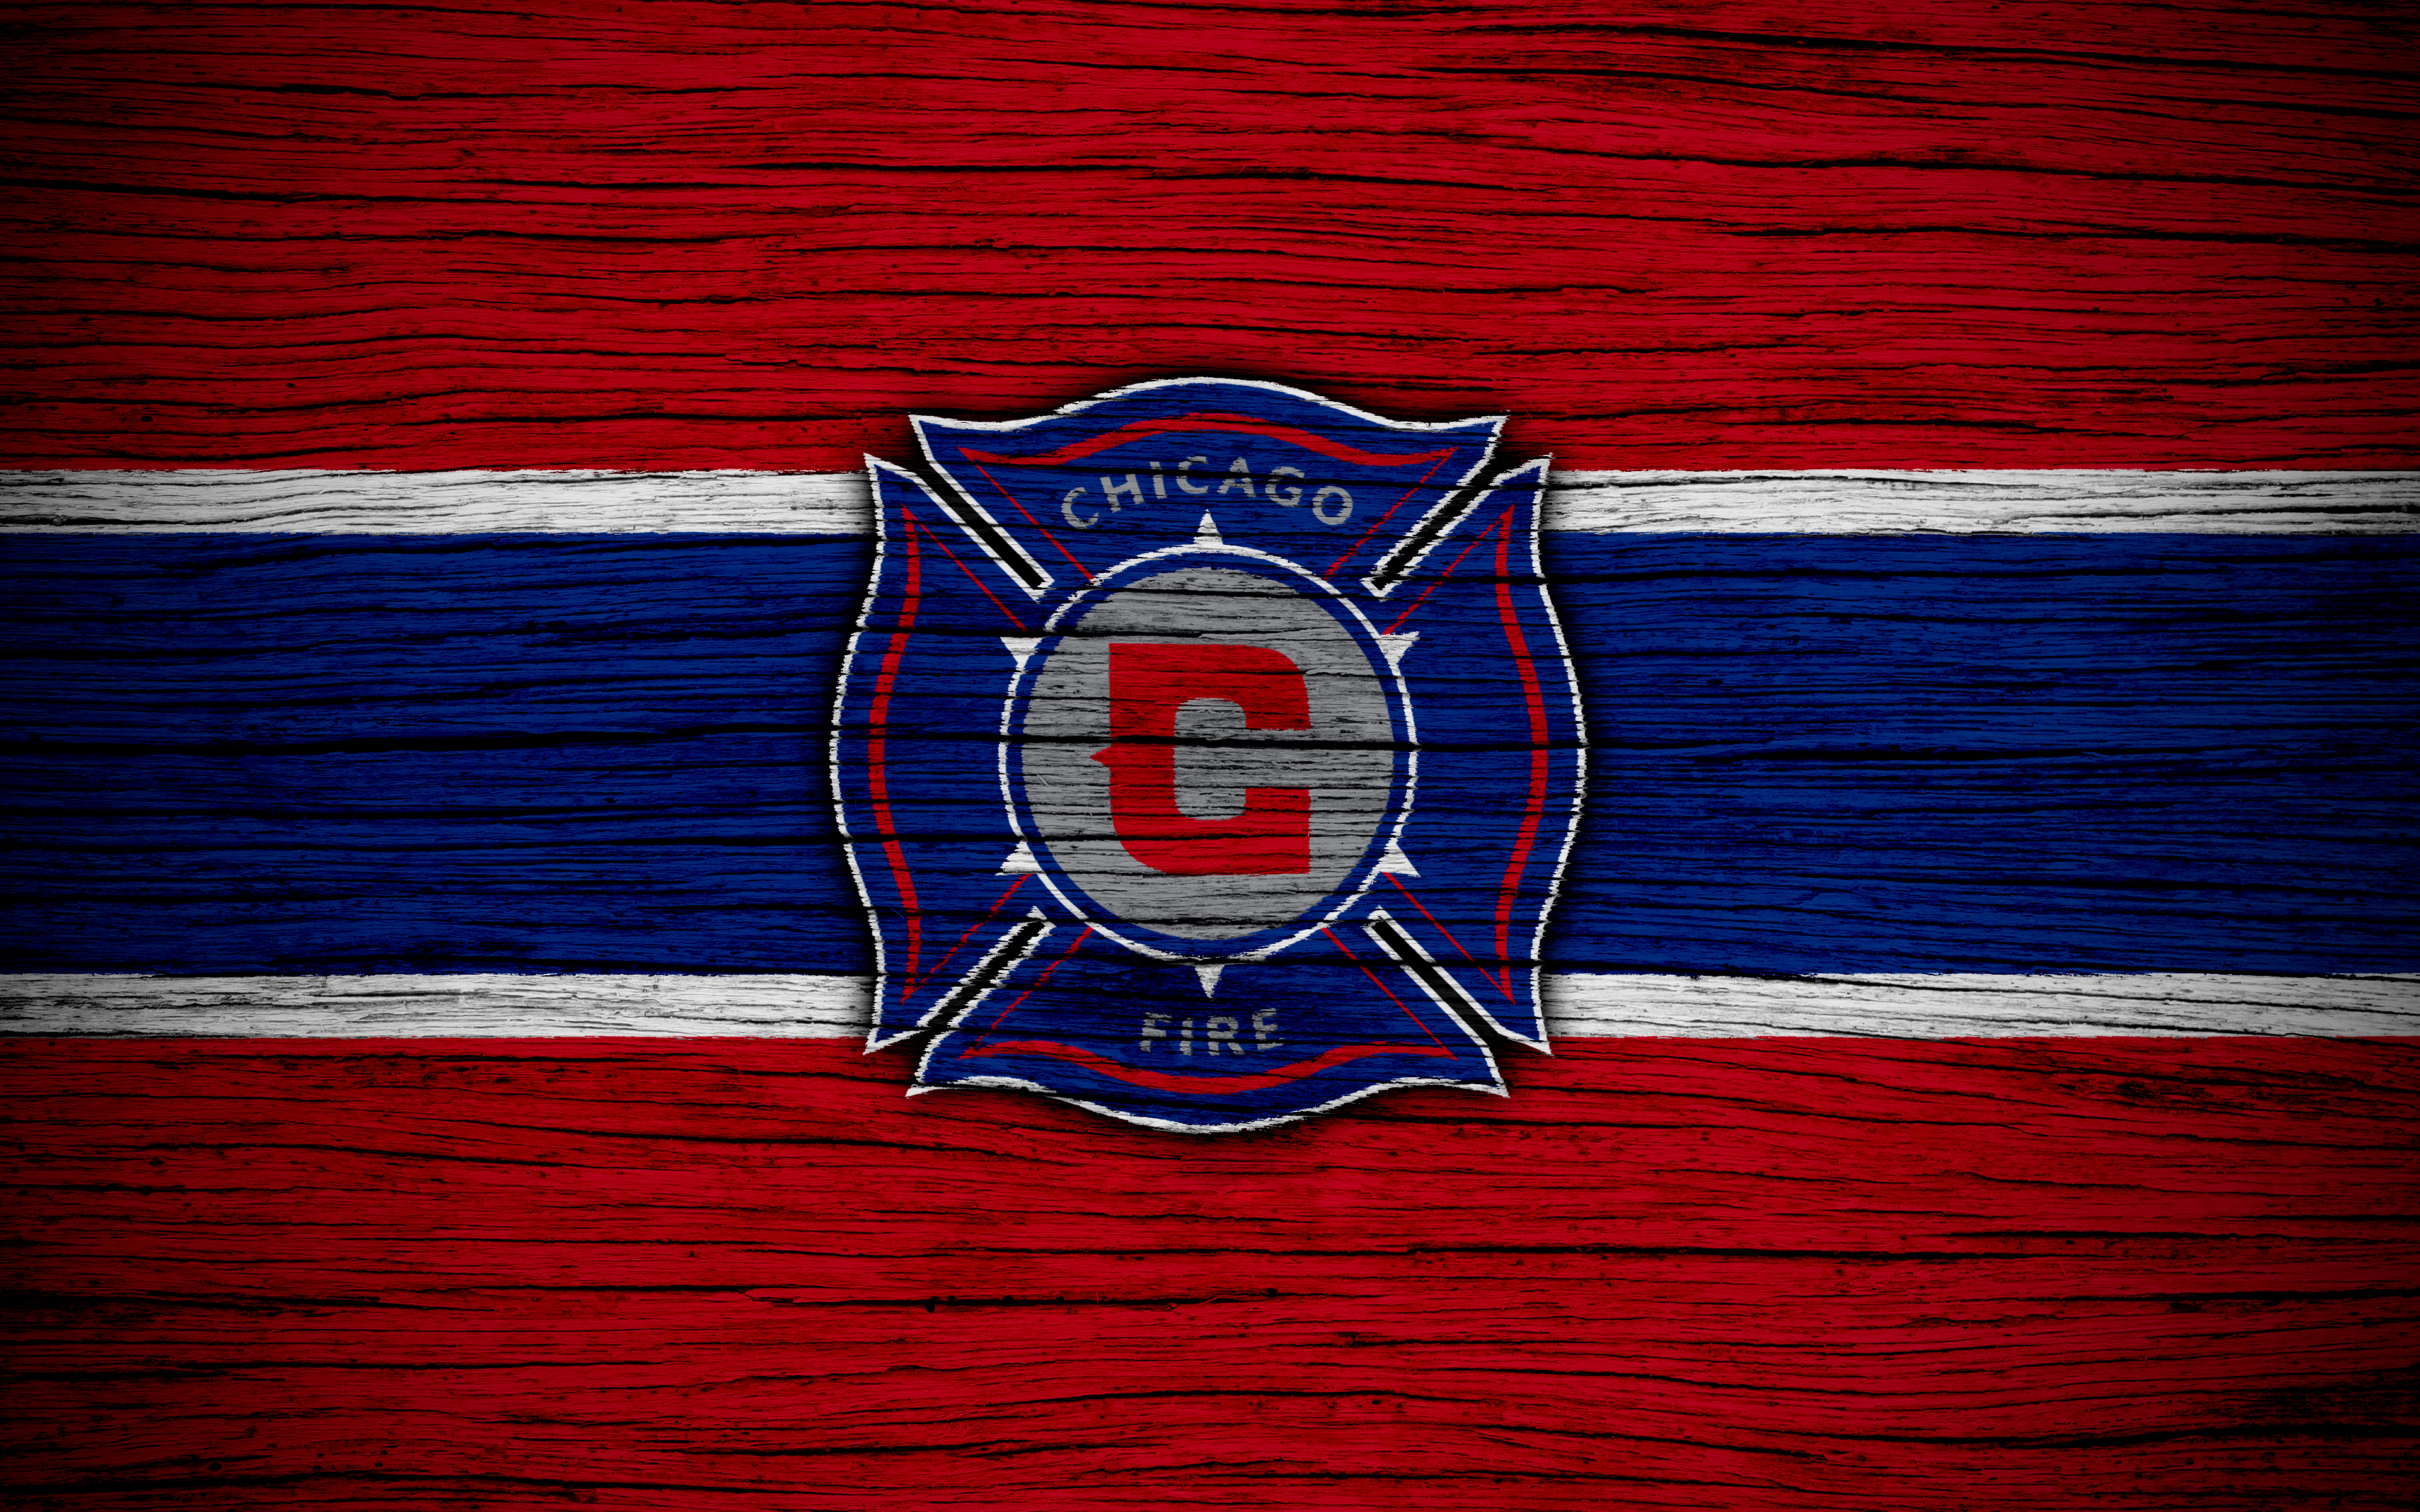 Chicago Fire Fc  Free Stock Photos